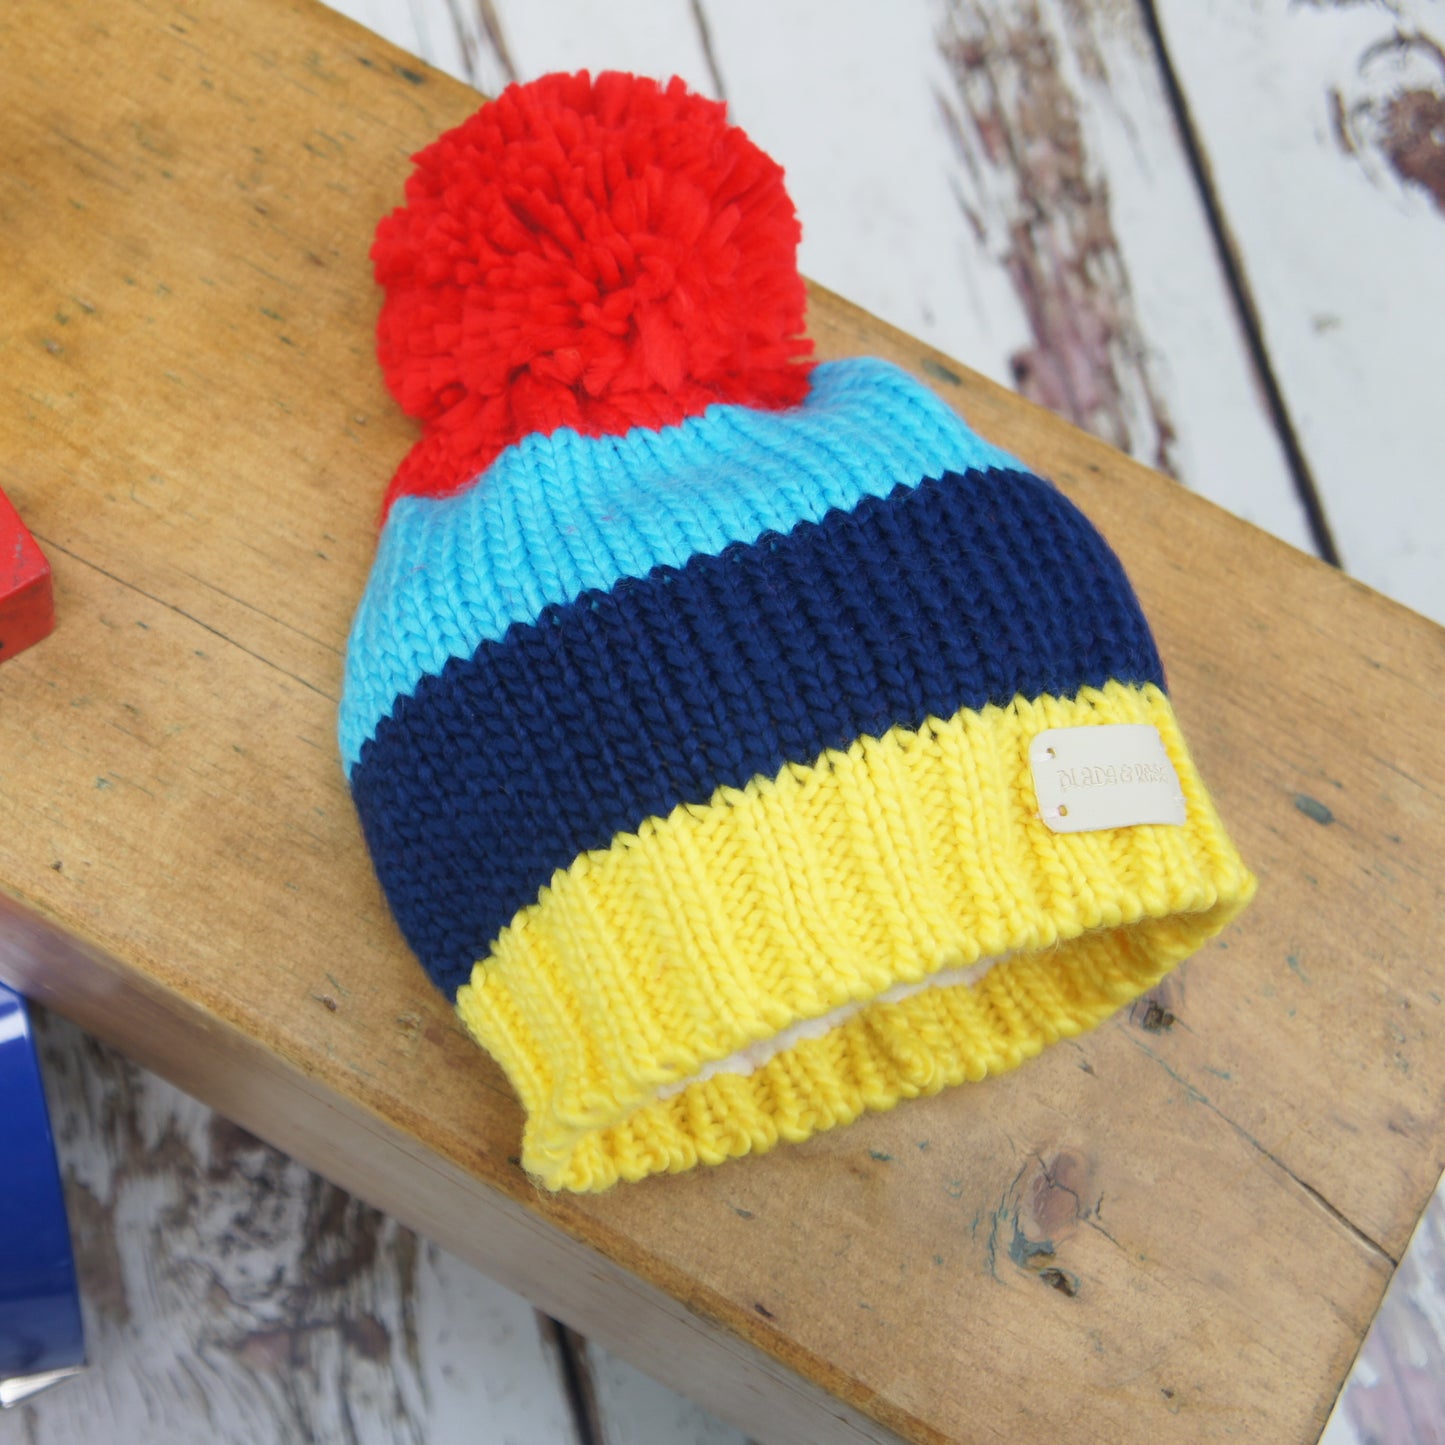 Blade & Rose blue & yellow striped bobble hat with large red pom pom